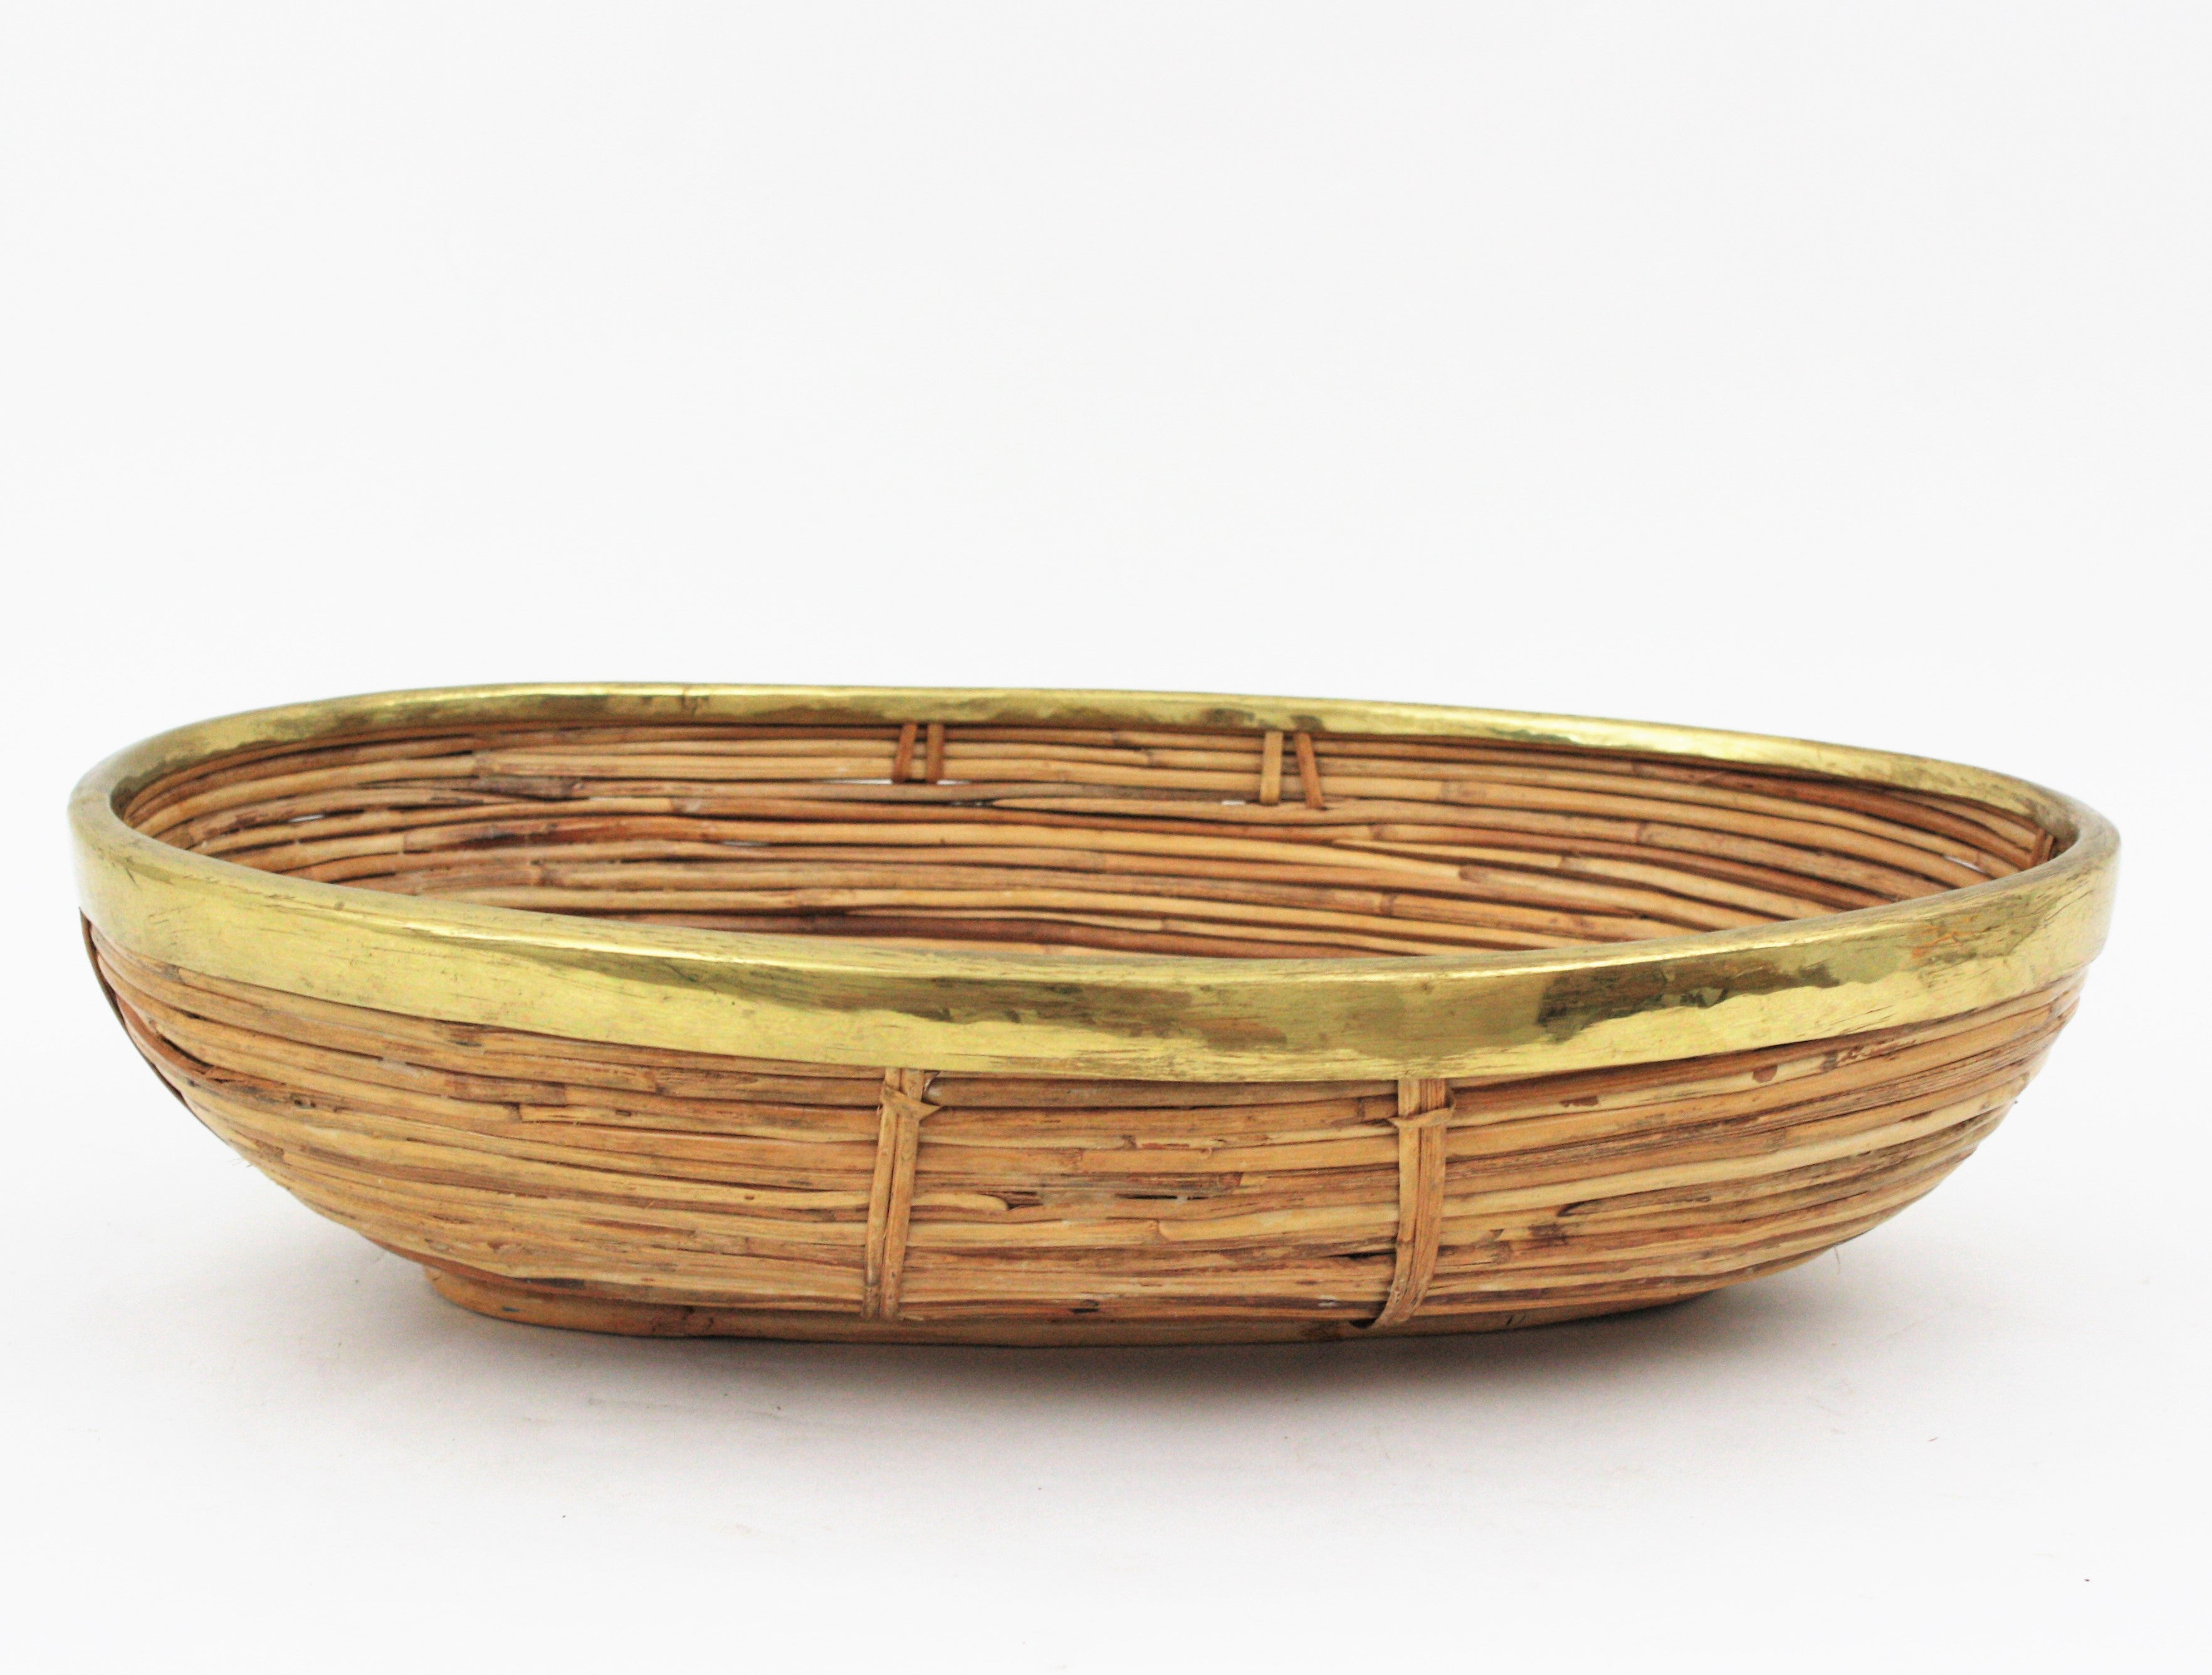 Rattan and Brass Italian Large Oval Basket Centerpiece Bowl, 1970s For Sale 3